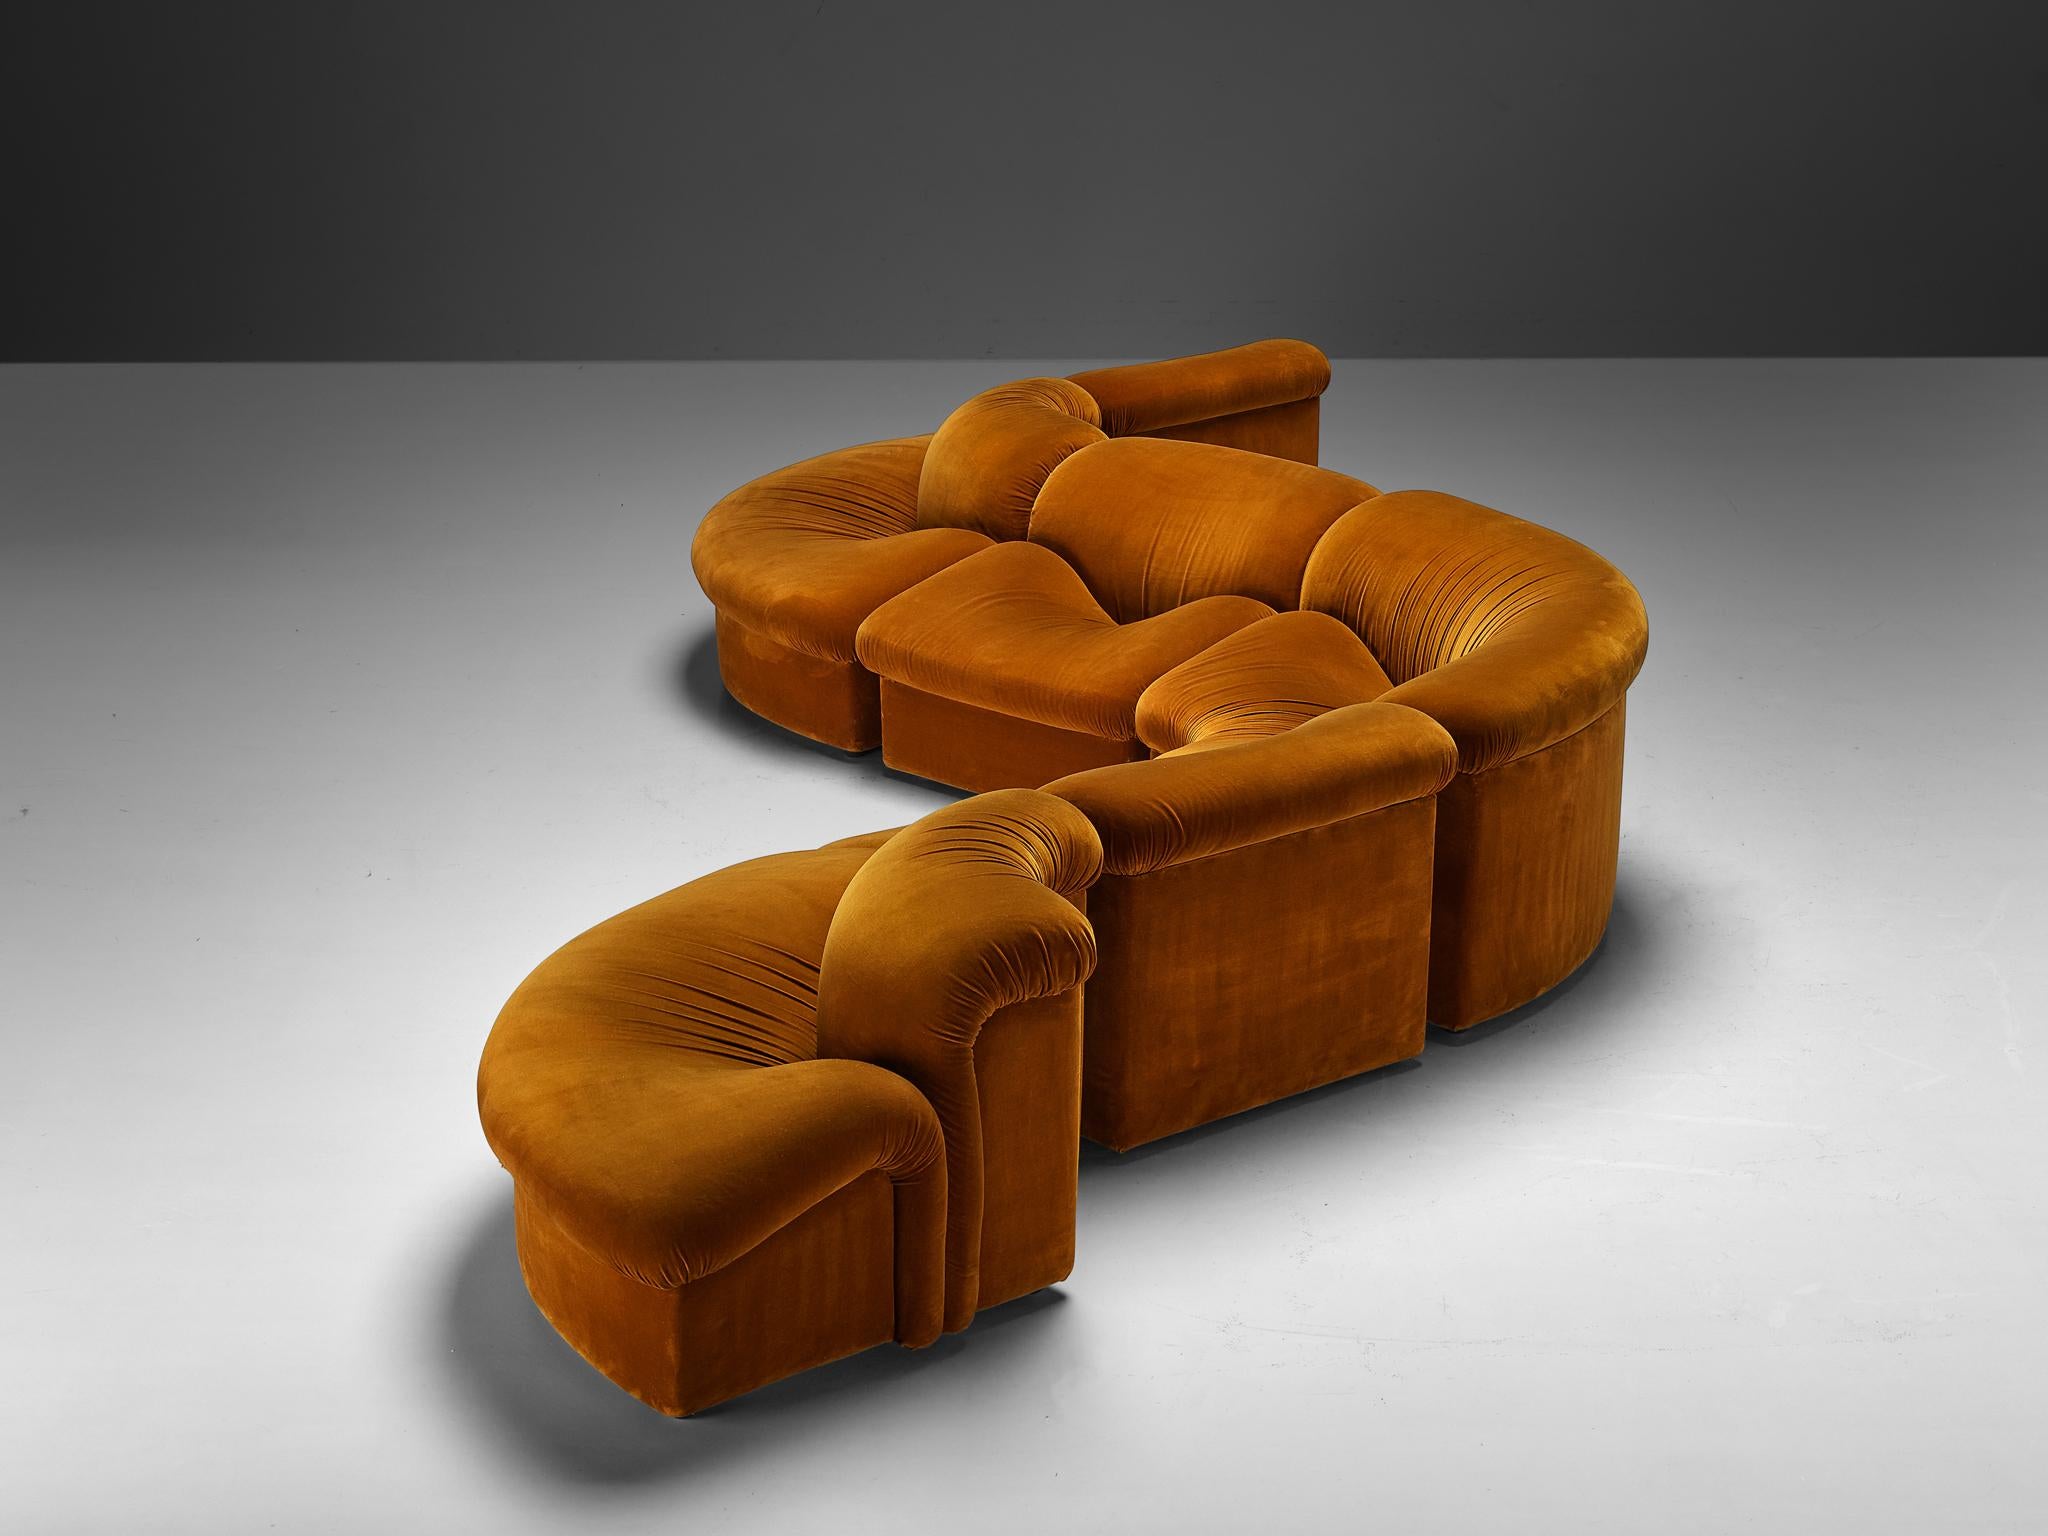 Metalarte modular 'Onda' sofa, fabric, Spain, 1970s

Introducing the epitome of retro chic: the 'Onda' sectional sofa by Metalarte. This rare modular sofa is crafted with timeless allure in a vibrant burnt orange color, this iconic piece harks back